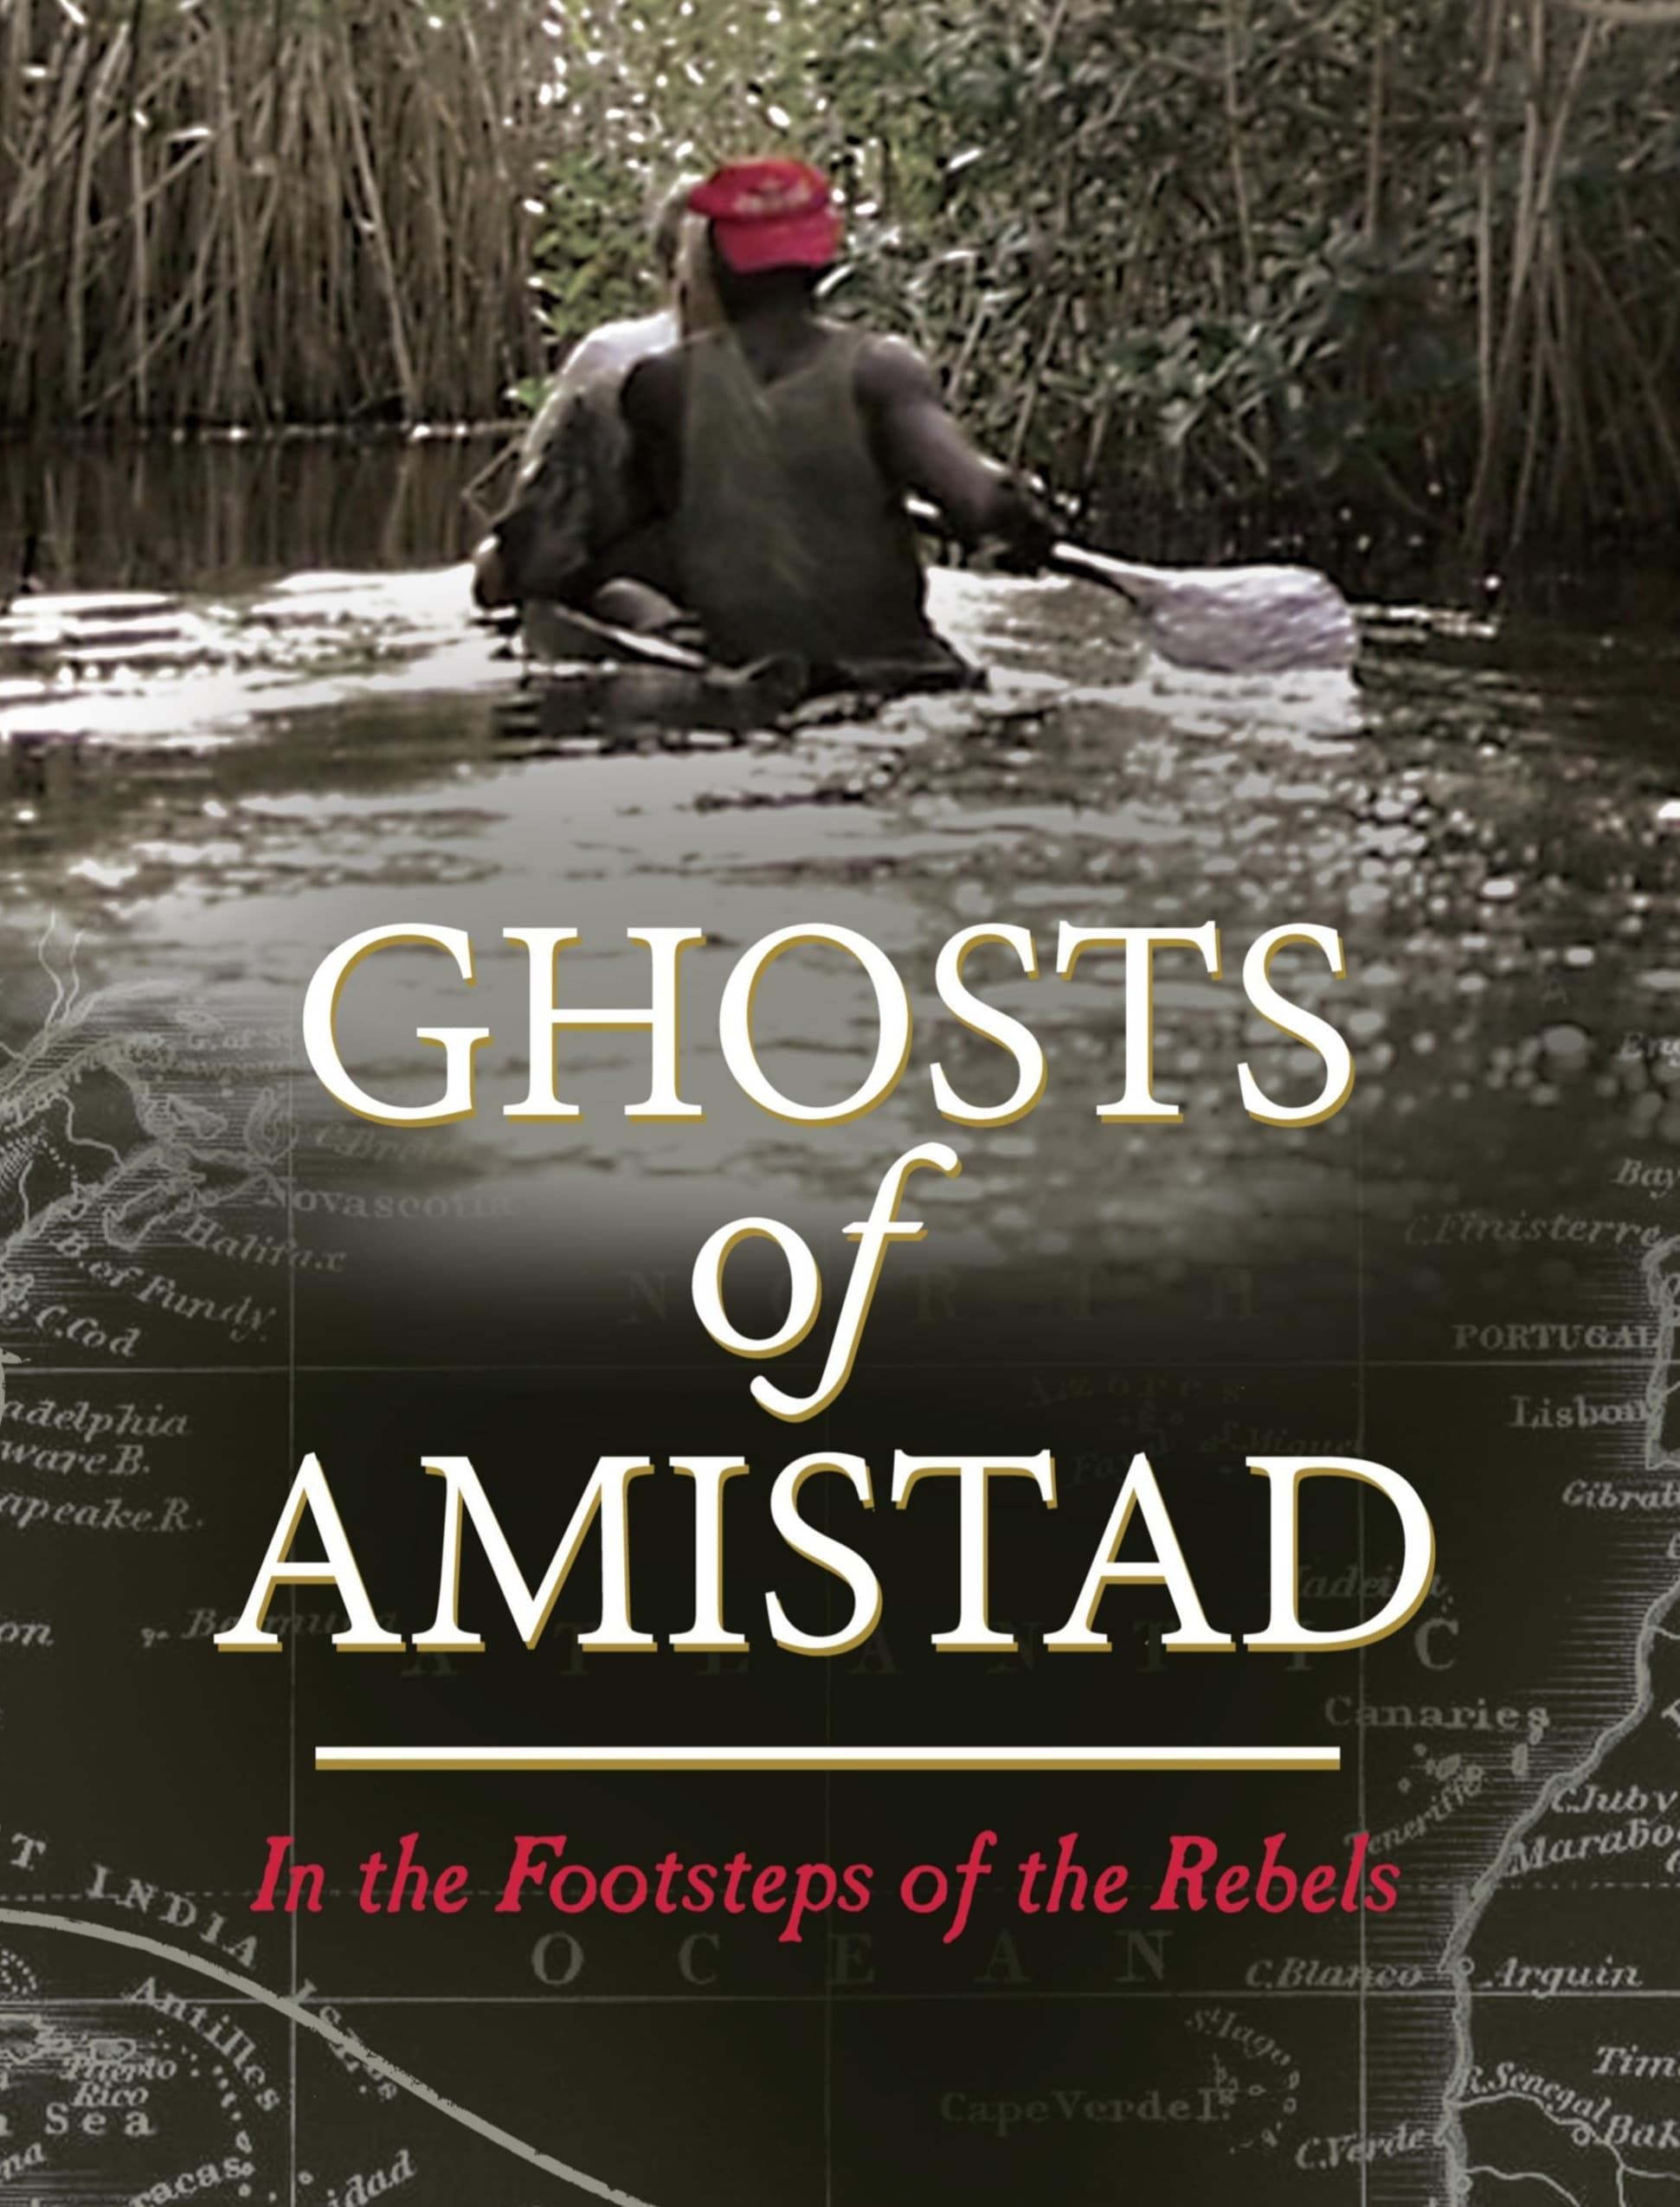 Ghosts of Amistad - In the Footsteps of Rebels